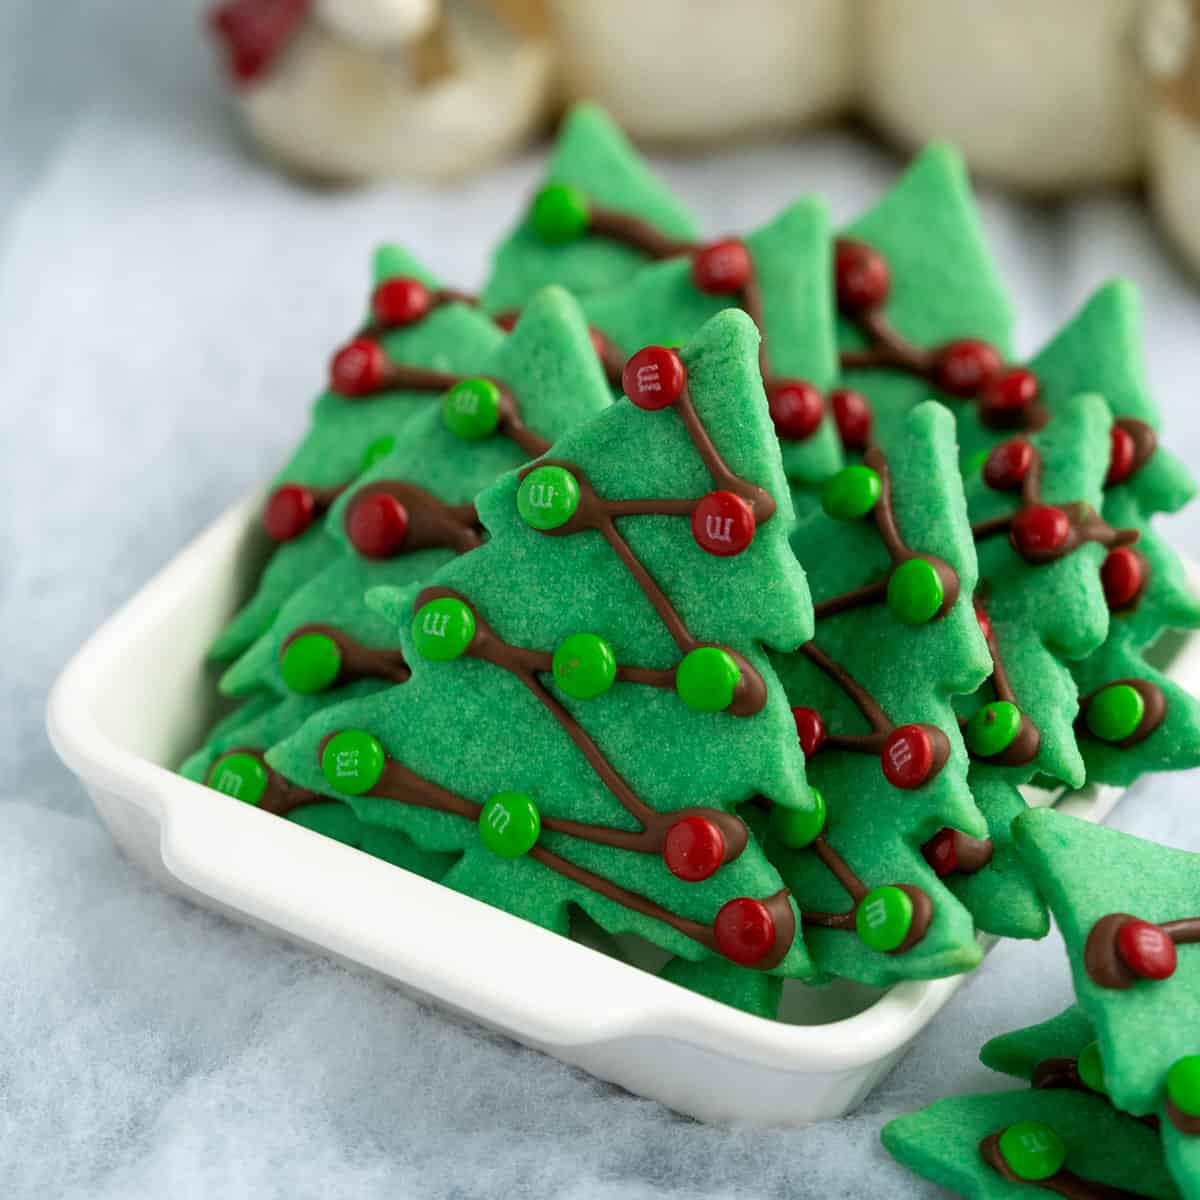 Christmas tree sugar cookies in white serving bowl on fake snow.